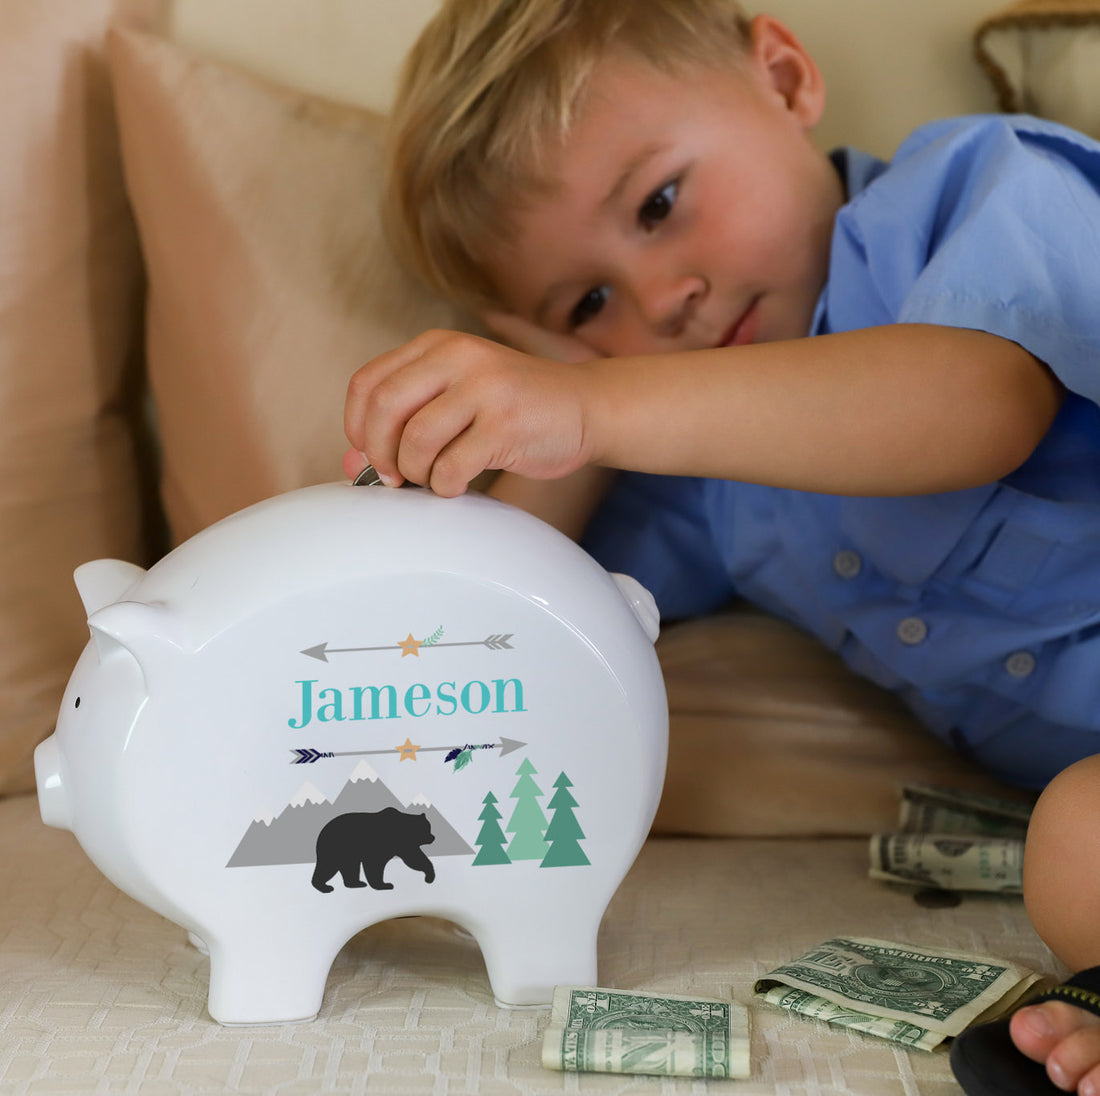 child putting coins into his own personalized piggy bankslider_item_Y4CxxE